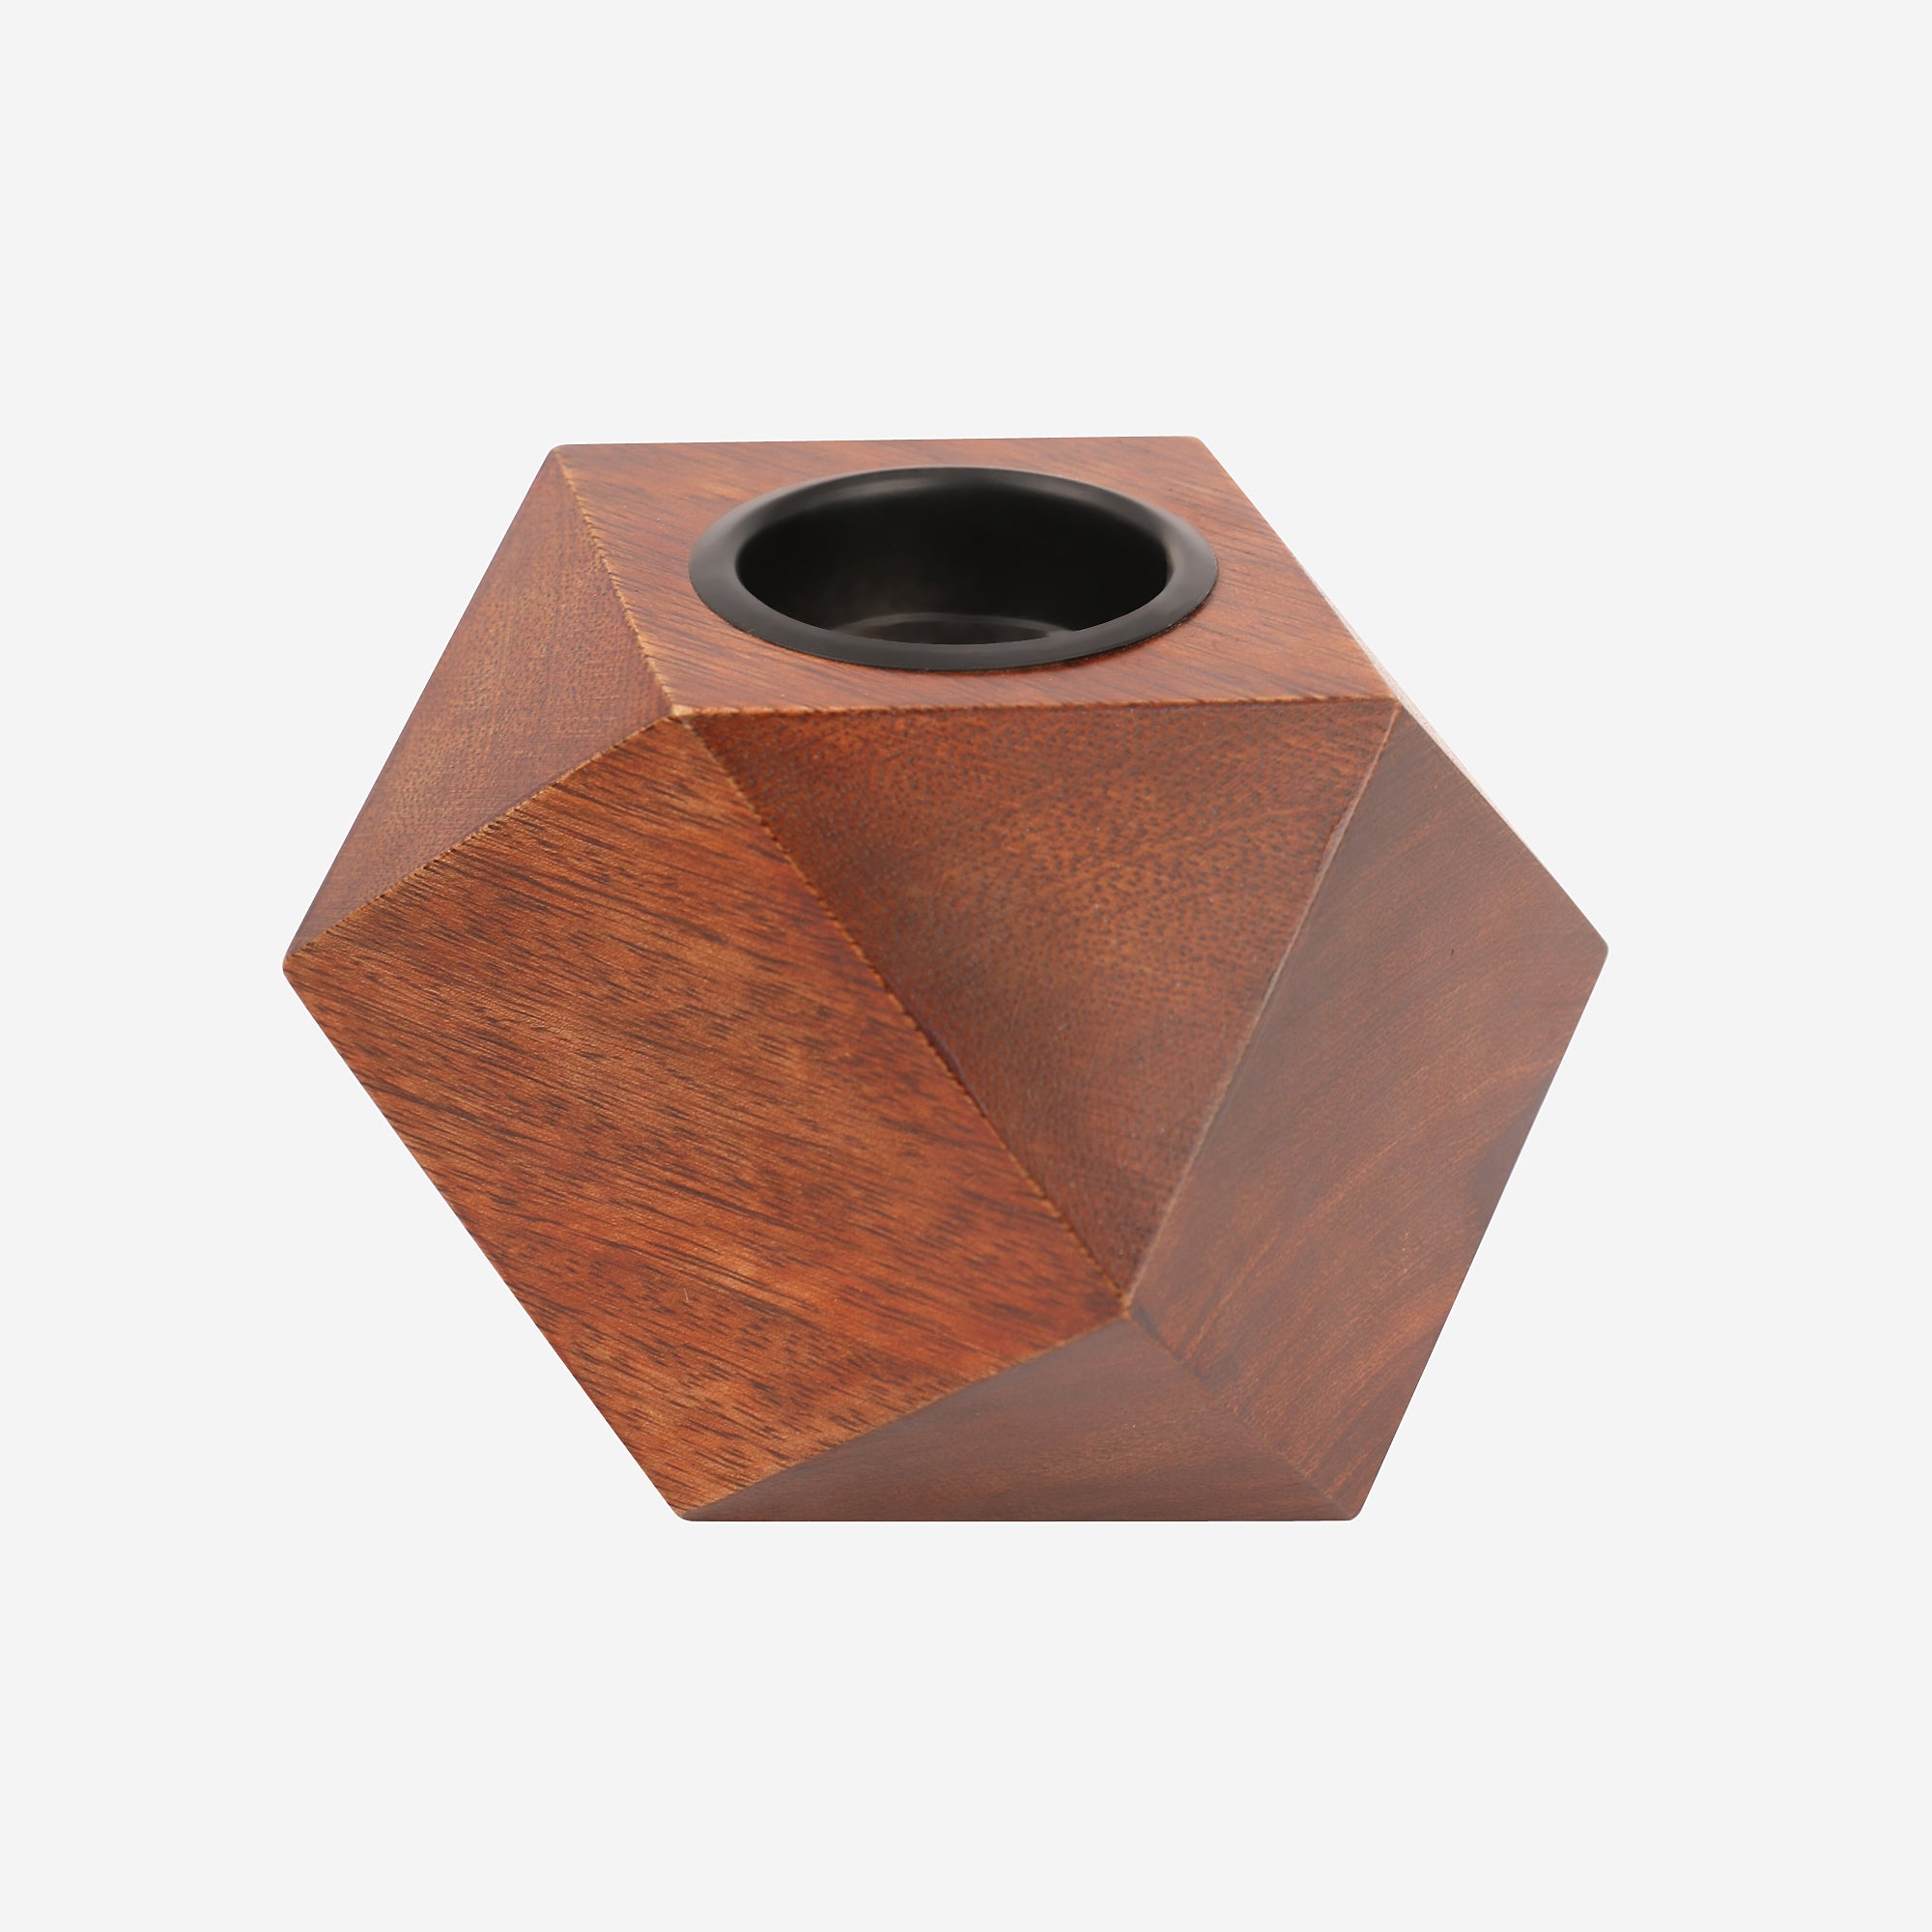 Geometric Shaped Wooden Candle Holder